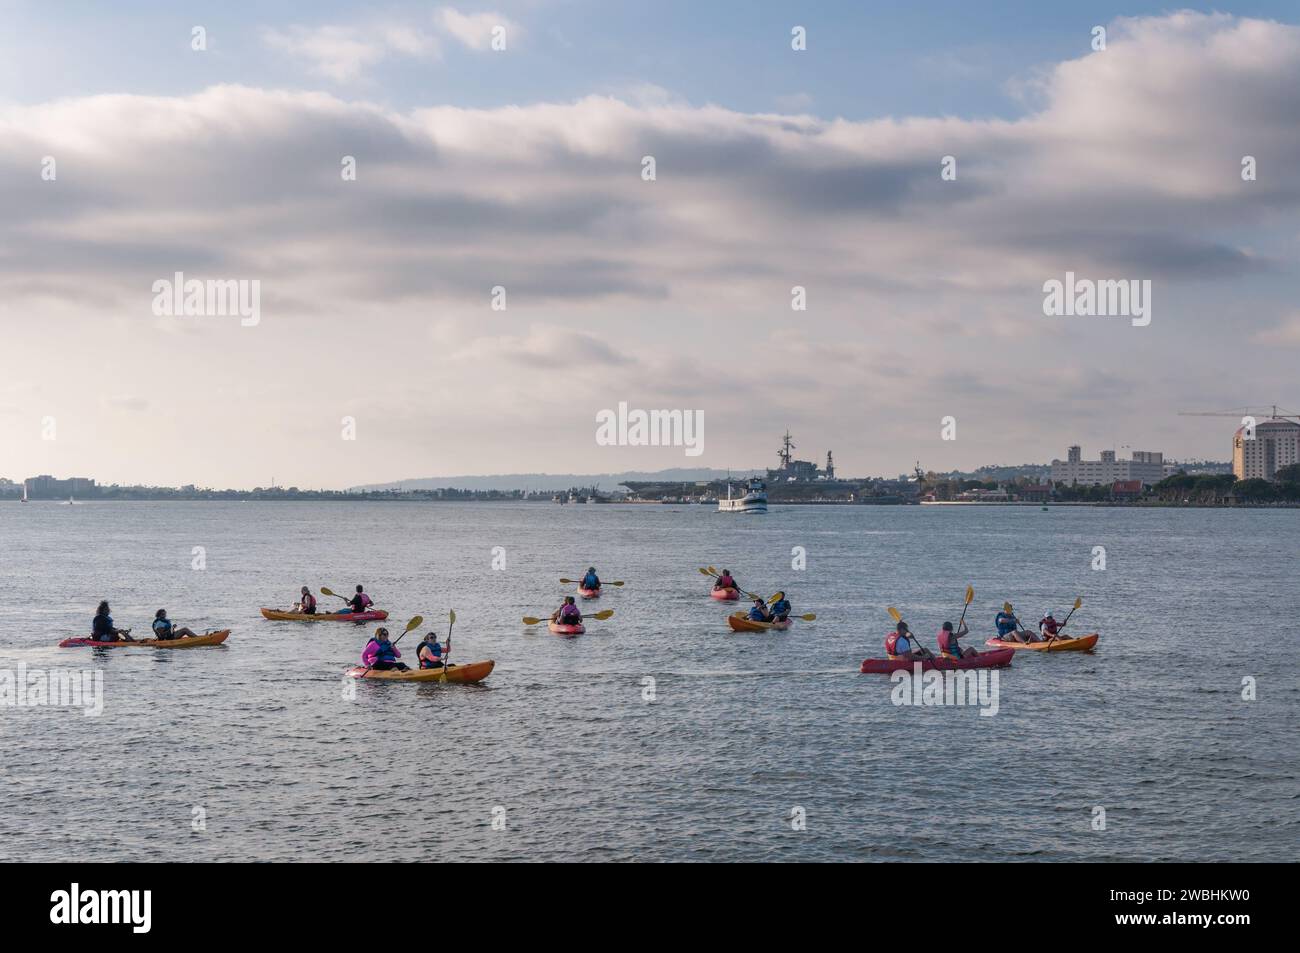 San Diego, California, USA - August 8, 2014. Group of people in kayaks paddling in the San Diego bay Stock Photo